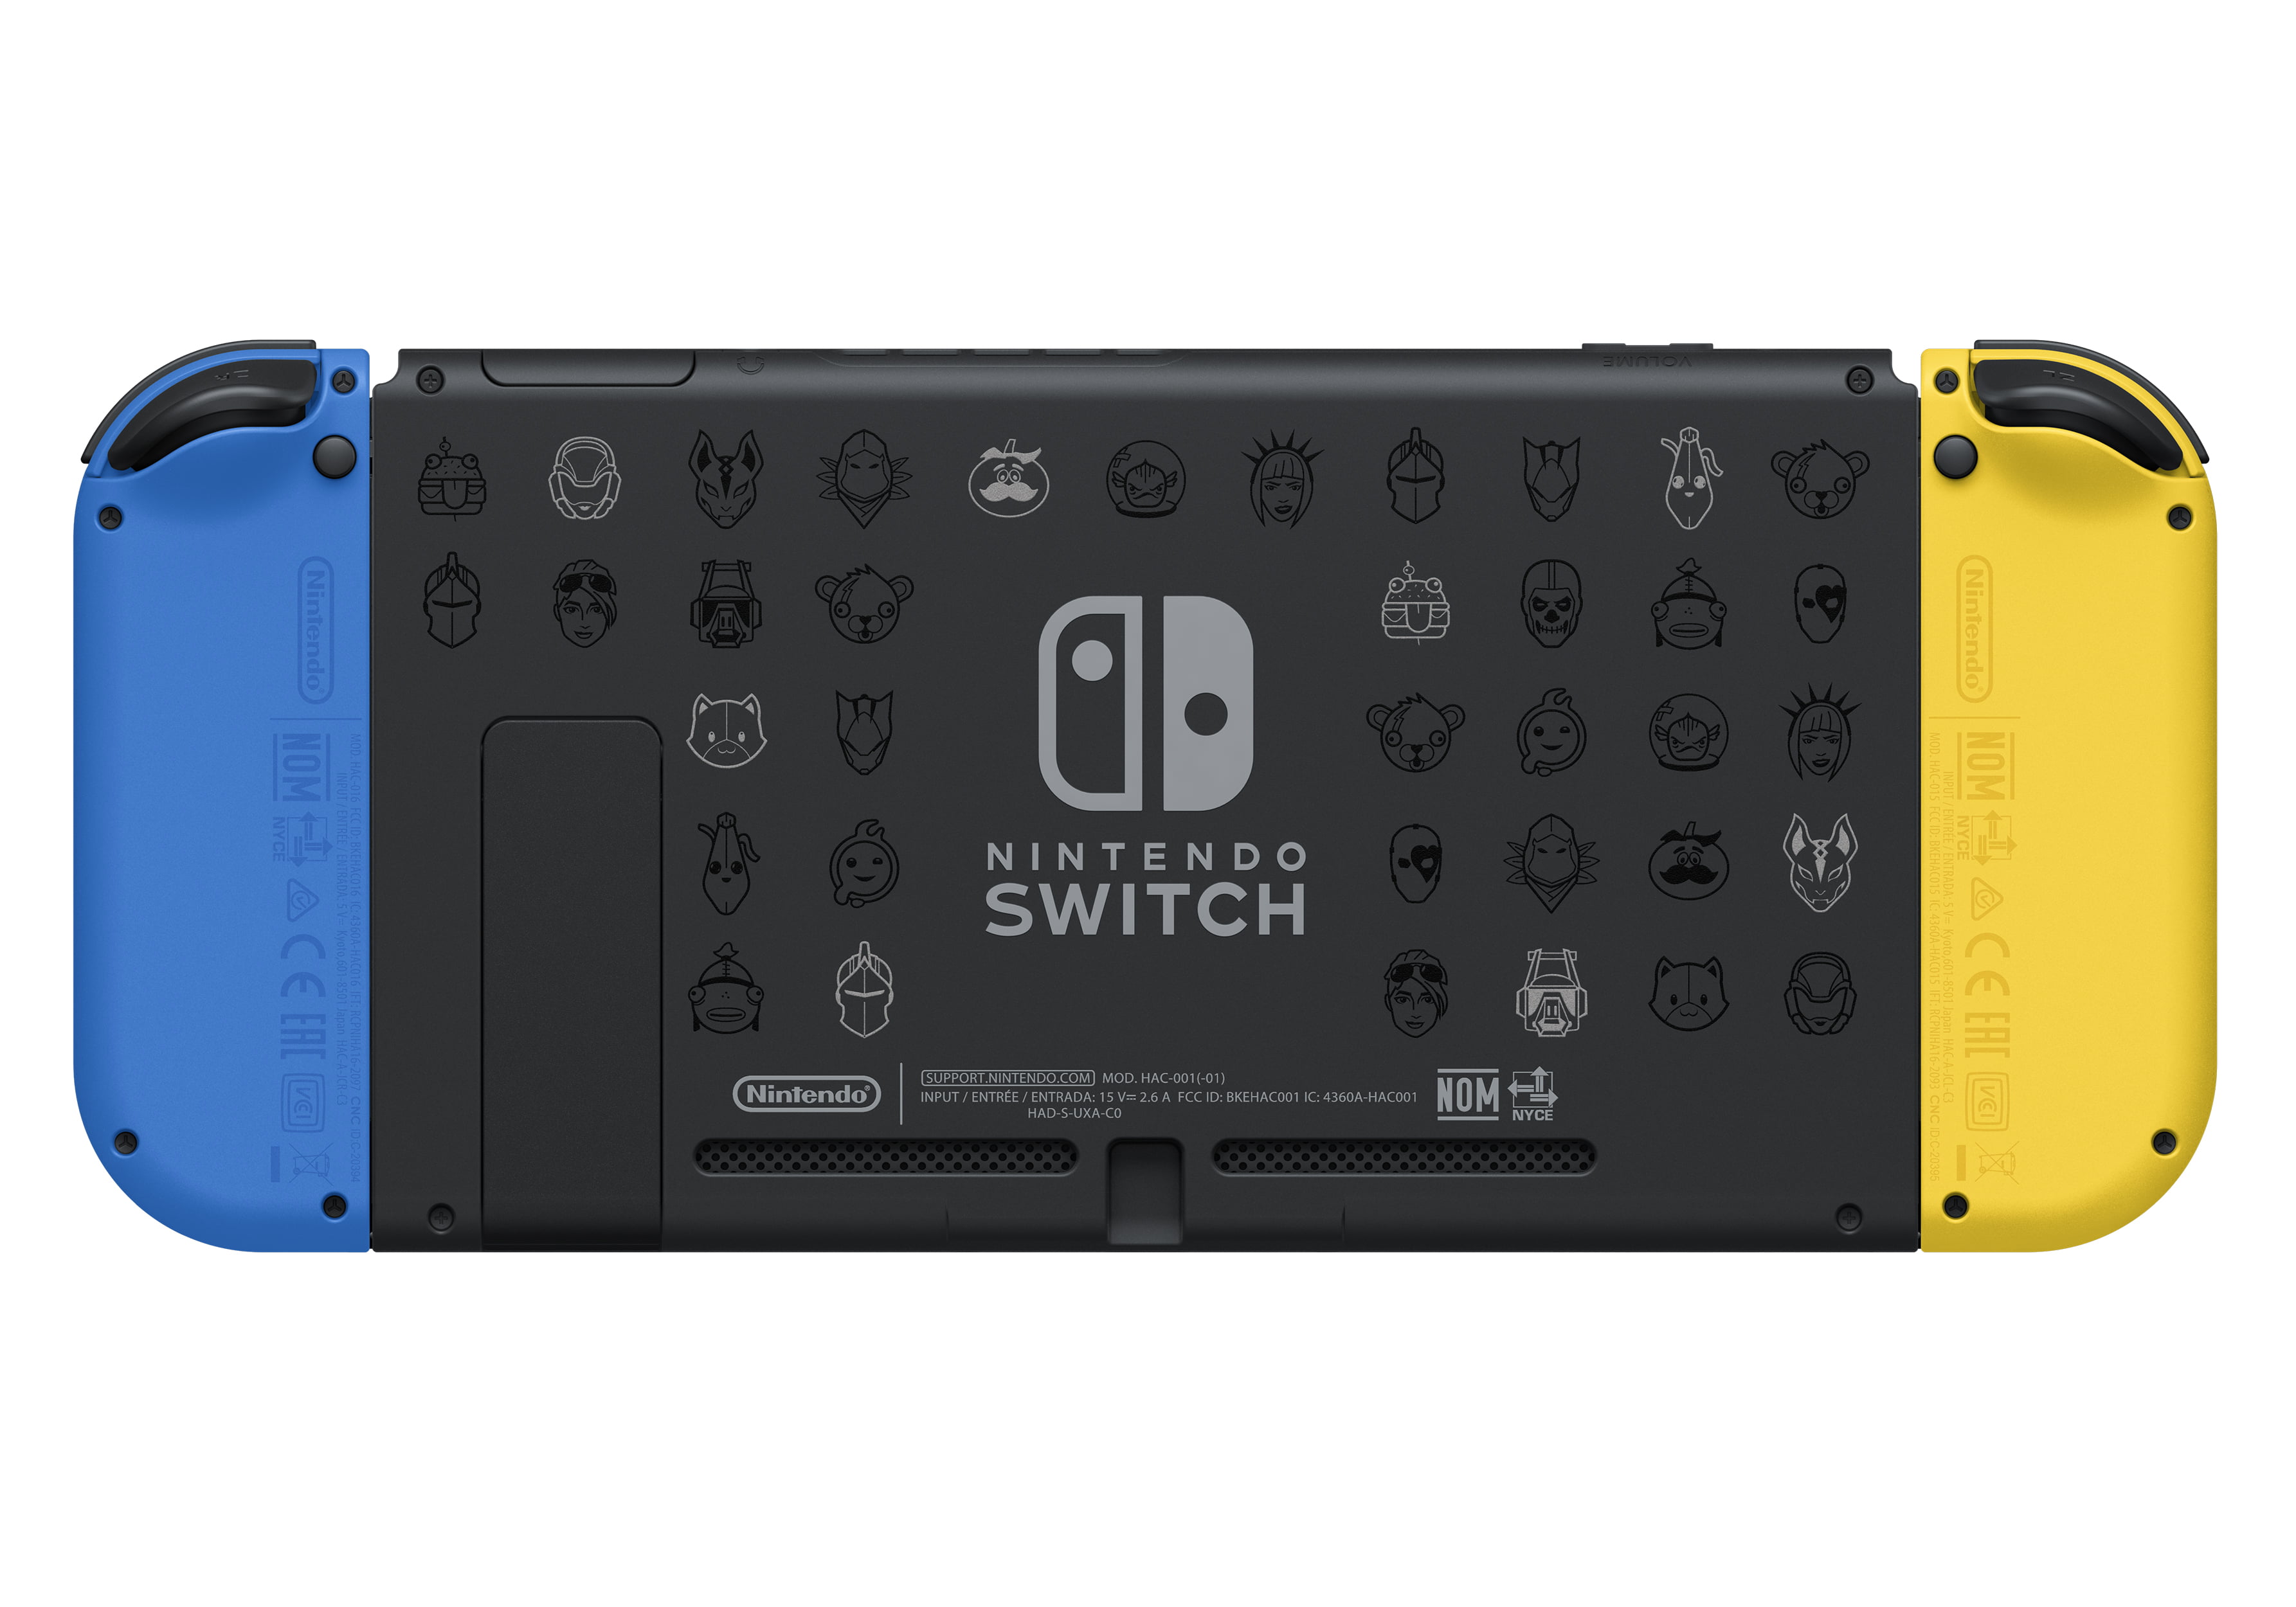 Nintendo Switch (Fortnite Wildcat Edition) is back in stock at